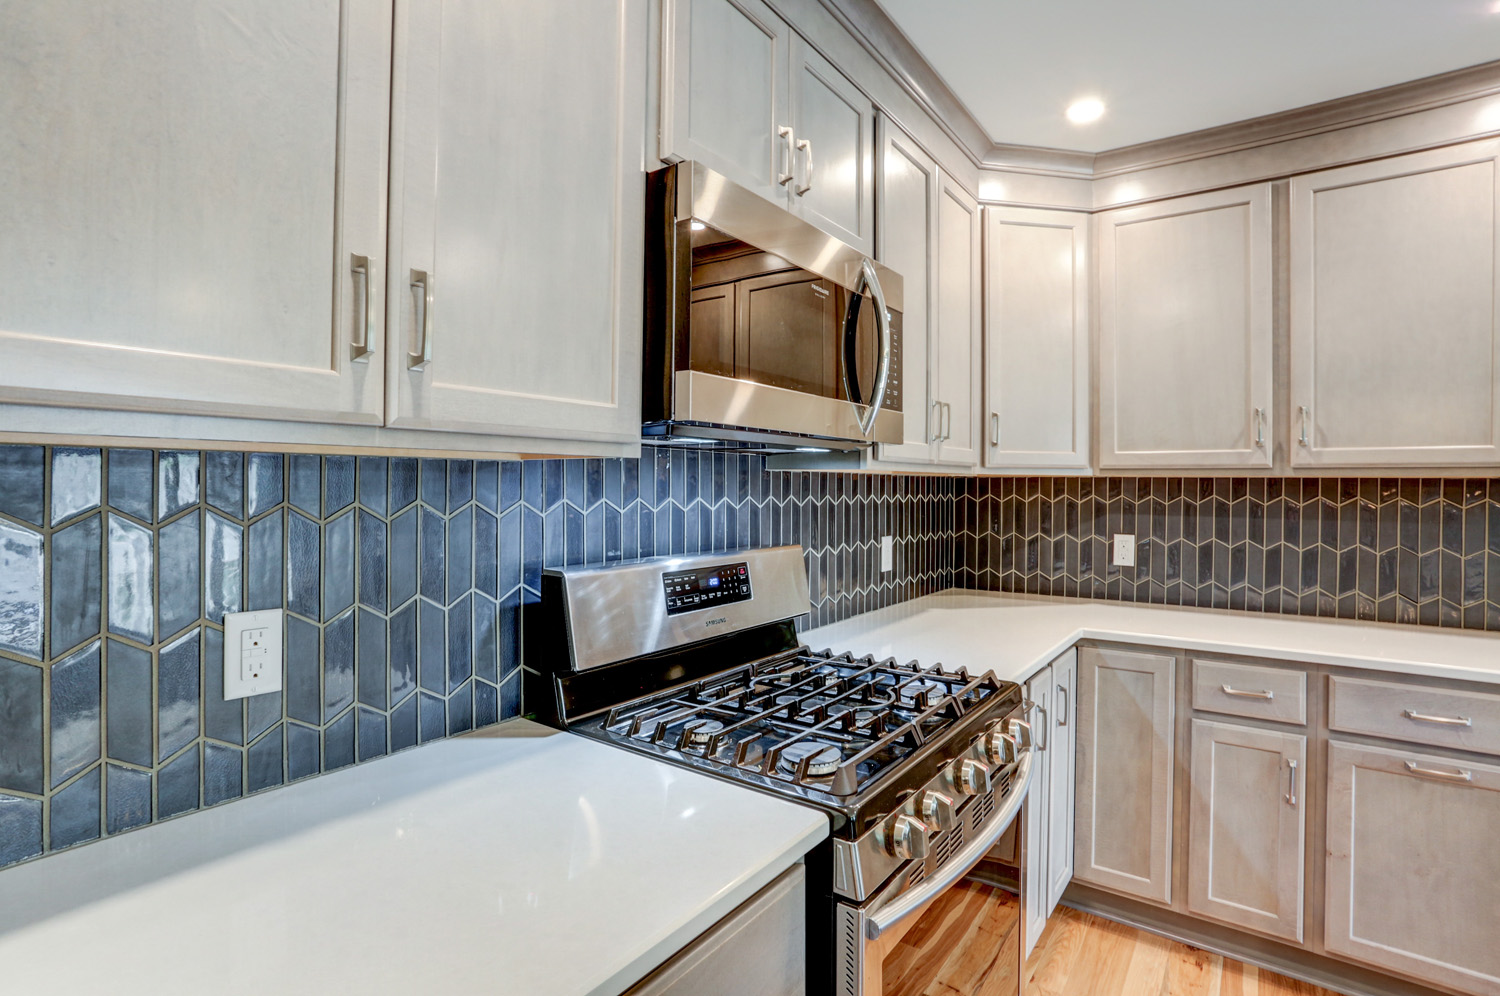 Rohrerstown Kitchen Remodel with steel grey cabinets and axis tile backsplash